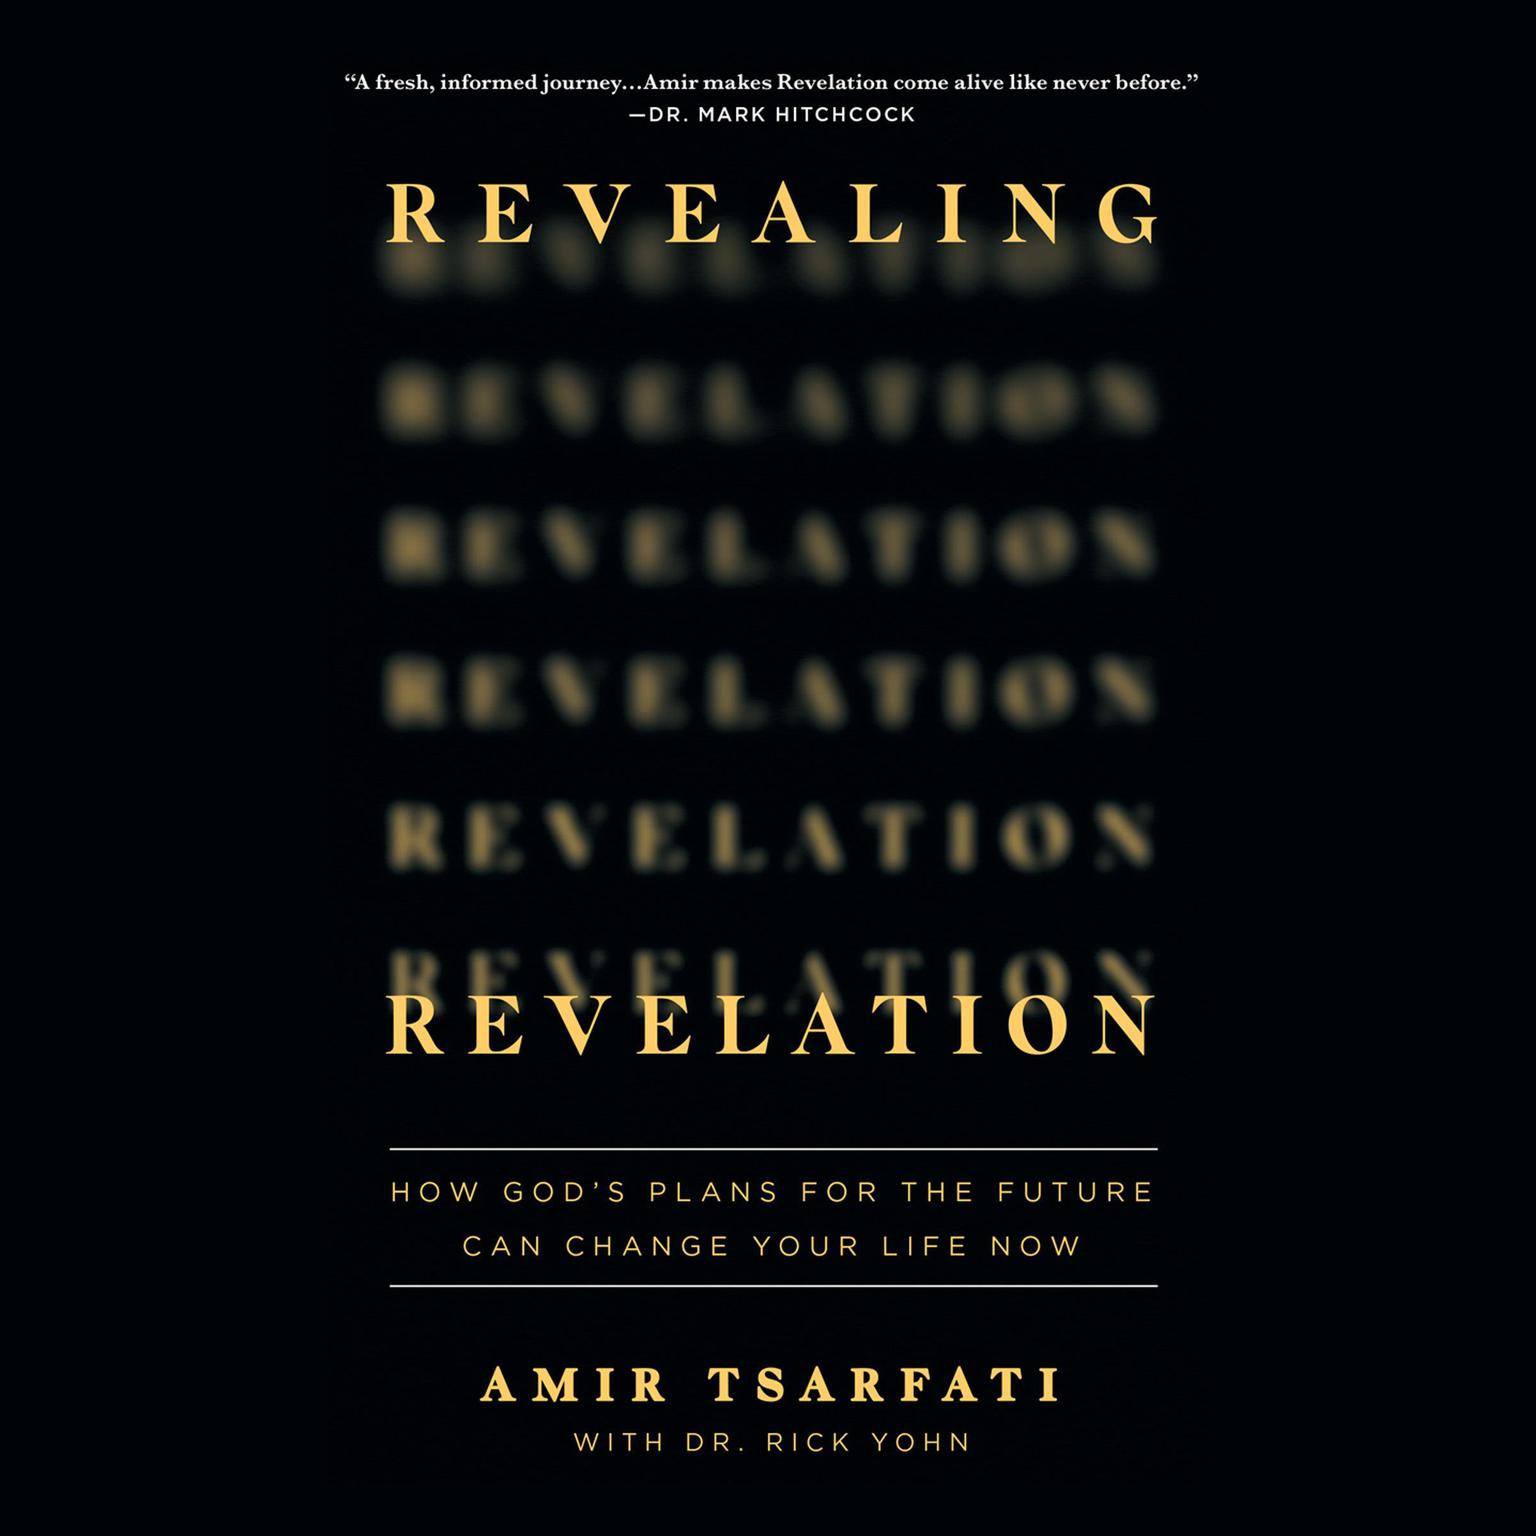 Revealing Revelation: How Gods Plans for the Future Can Change Your Life Now Audiobook, by Amir Tsarfati